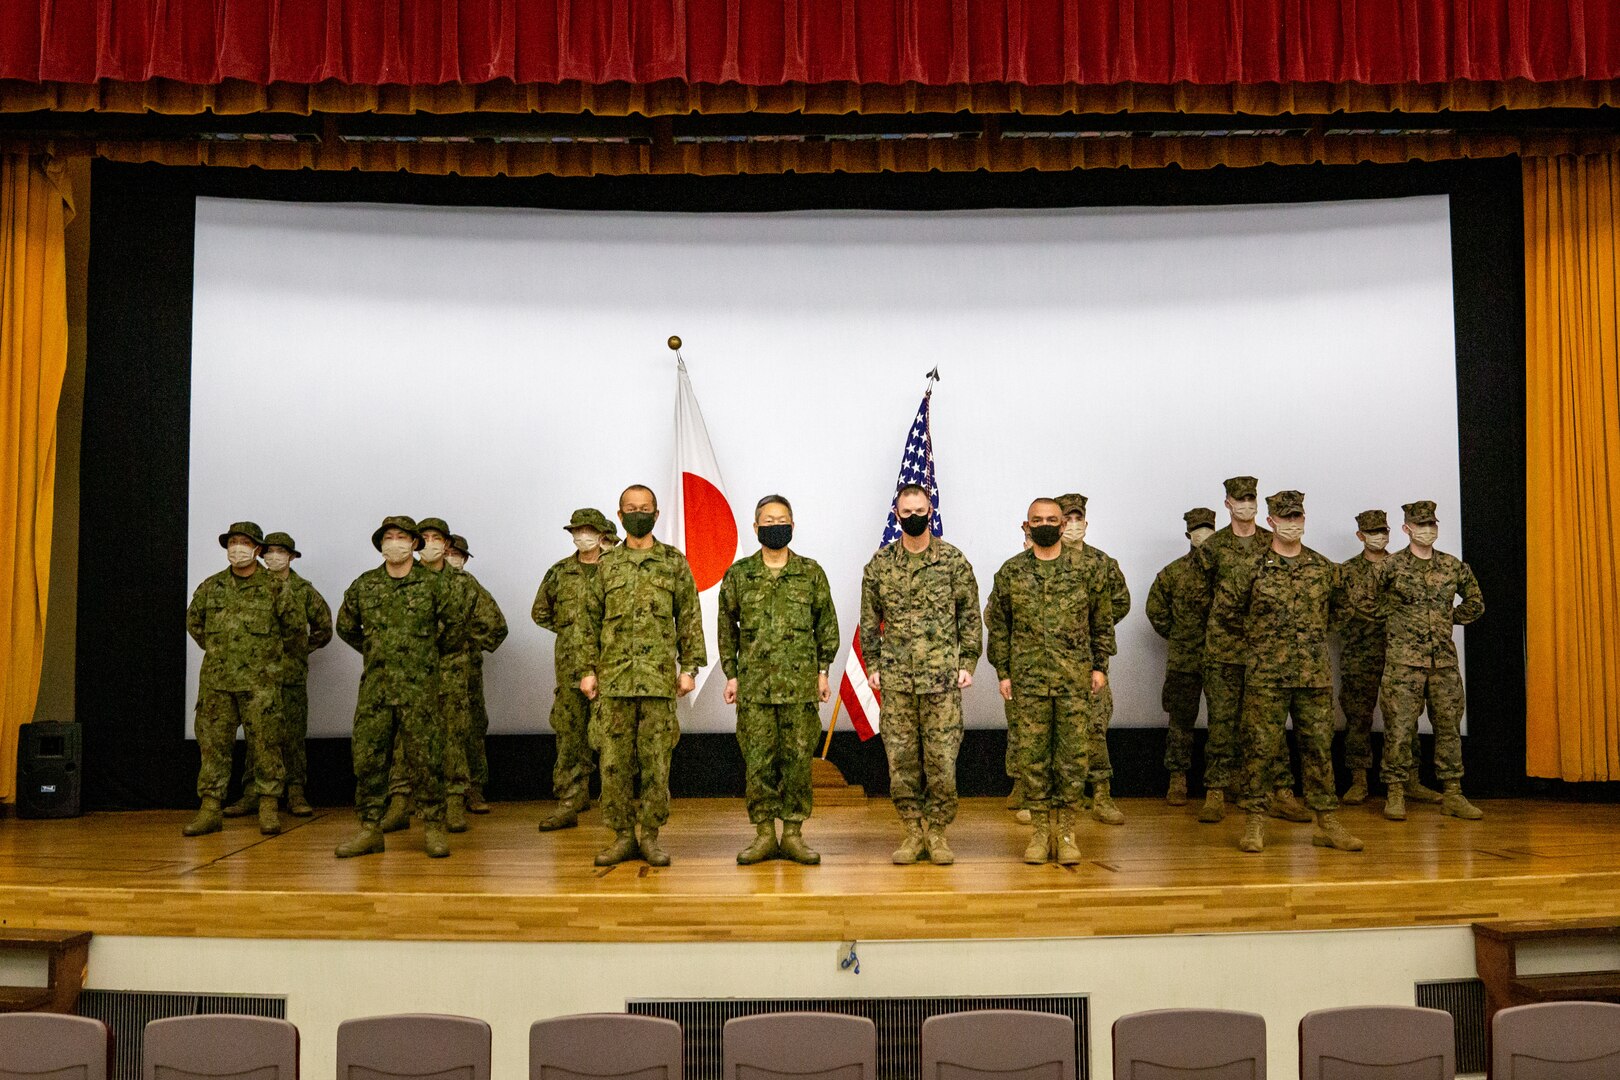 Japan Ground Self-Defense Force Warrant Officer Masanobu Murawaki, command sergeant major of the Amphibious Rapid Deployment Brigade, left, Maj. Gen. Takanori Hirata, commander of the Amphibious Rapid Deployment Brigade, and U.S. Marine Corps Brig. Gen. Kyle B. Ellison, commanding general of 3D Marine Expeditionary Brigade, and Sgt. Maj. Adan Moreno, sergeant major of 3D Marine Expeditionary Brigade conduct the opening ceremony of Exercise Yama Sakura 79 on Camp Courtney, Okinawa, Japan, Dec. 8, 2020. Yama Sakura 79 allows Marines, and their Japanese counterparts to maintain their interoperability, and readiness to respond to any crisis or contingency in the Indo-Pacific region.